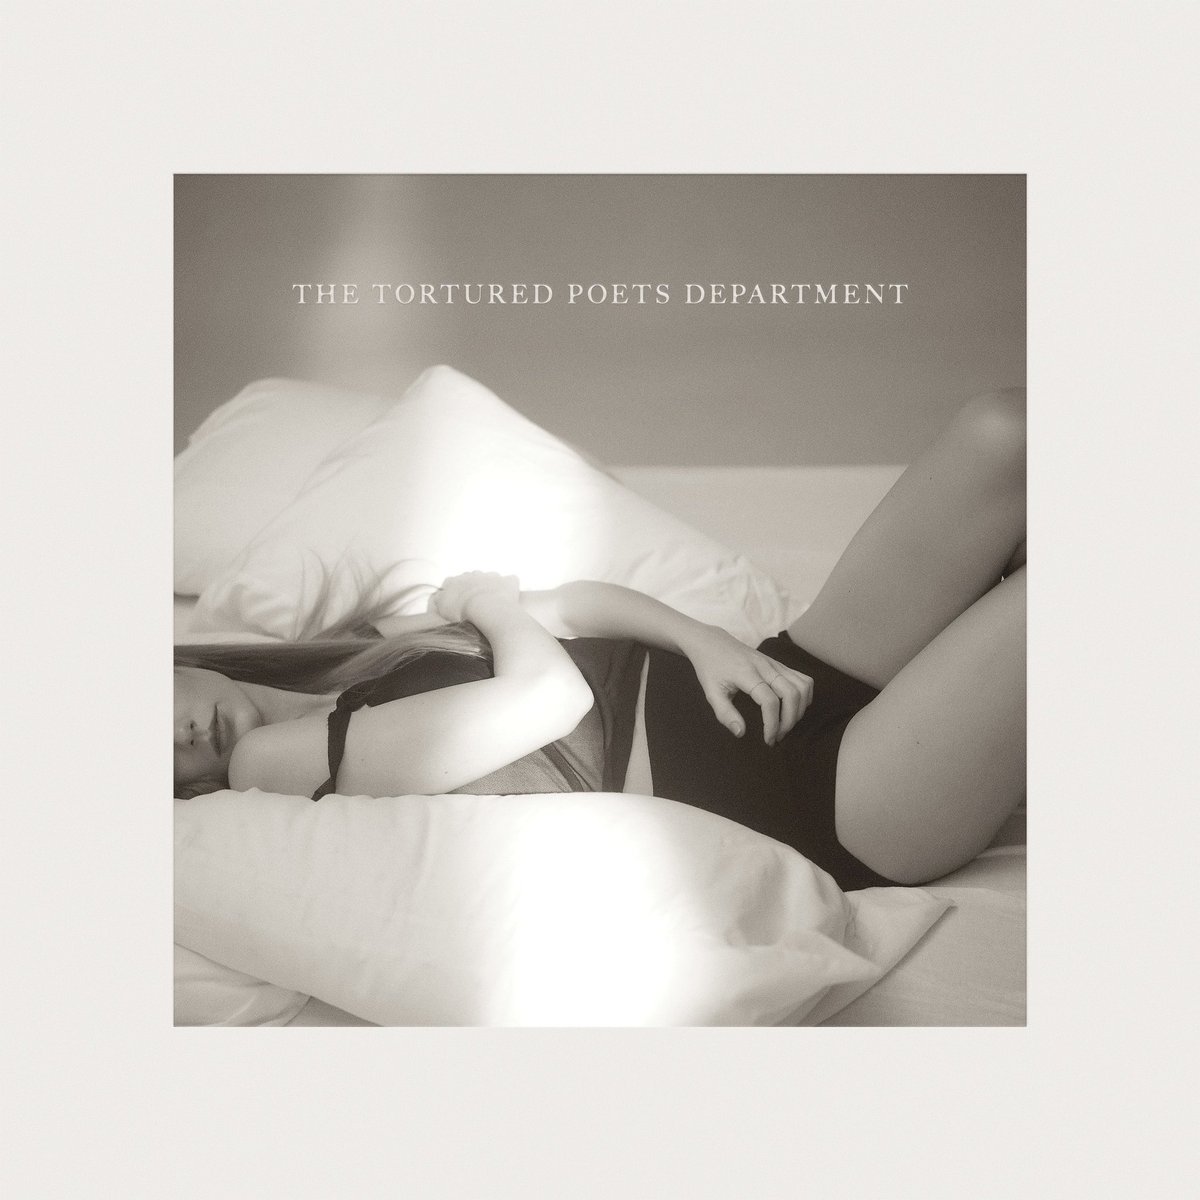 💿| The Tortured Poets Department standard edition is 16 tracks — There is 1 bonus track titled “The Manuscript”